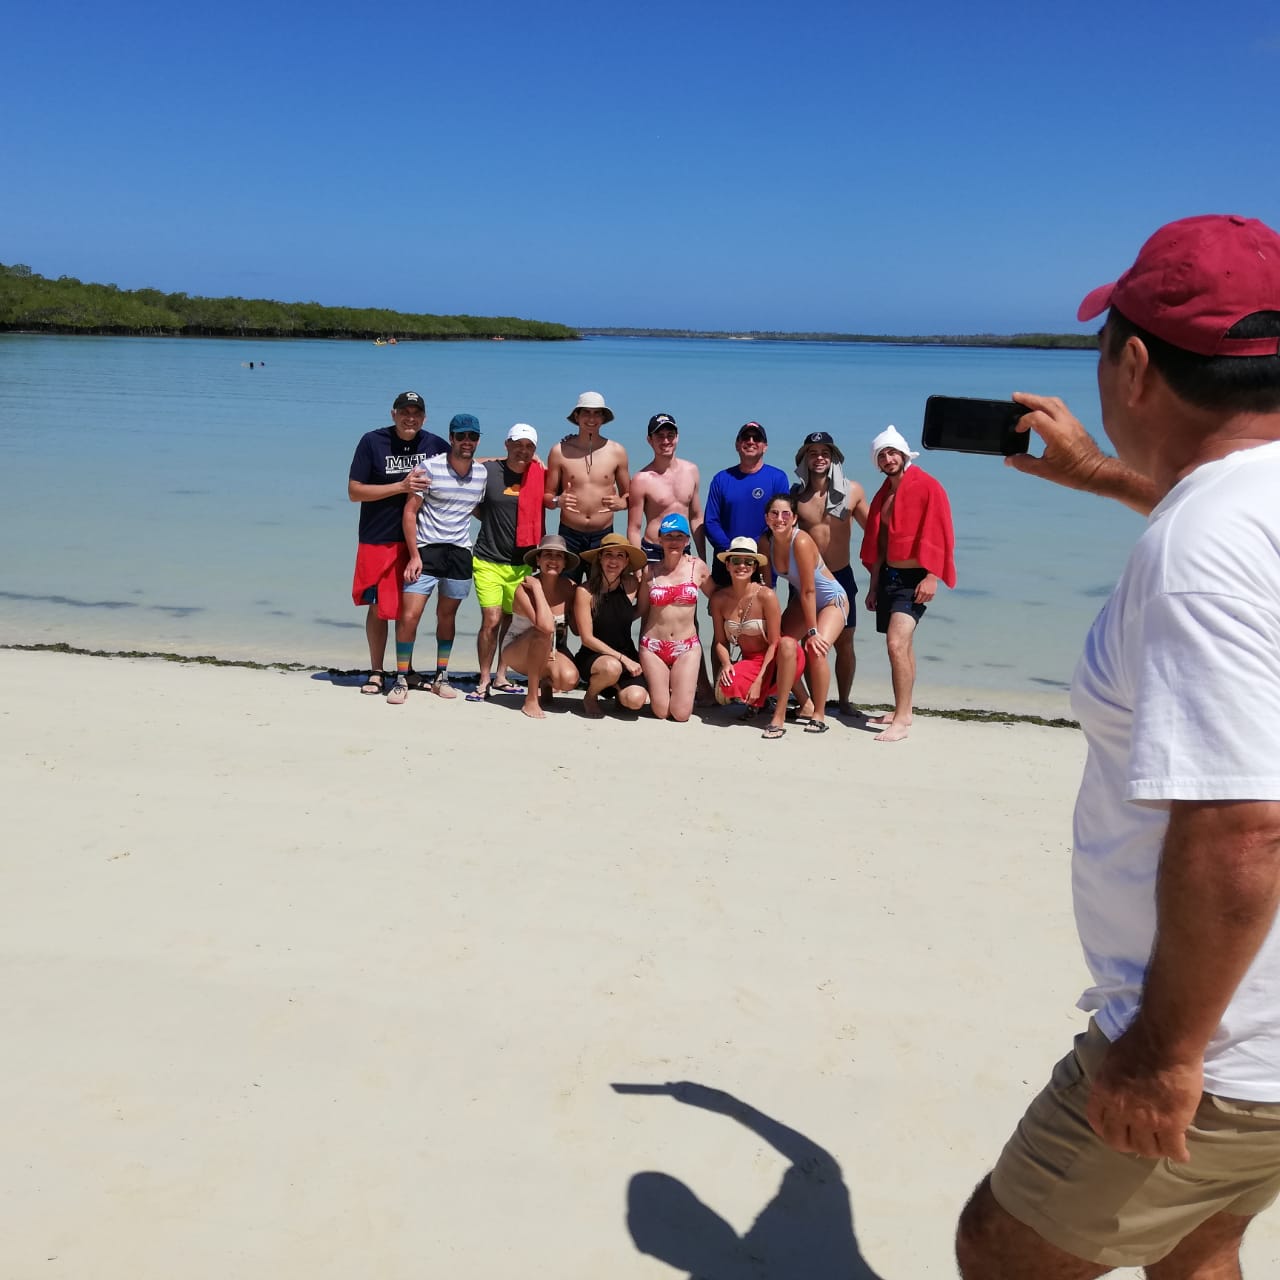 tourists taking a photo on tortuga bay in galapagos islands